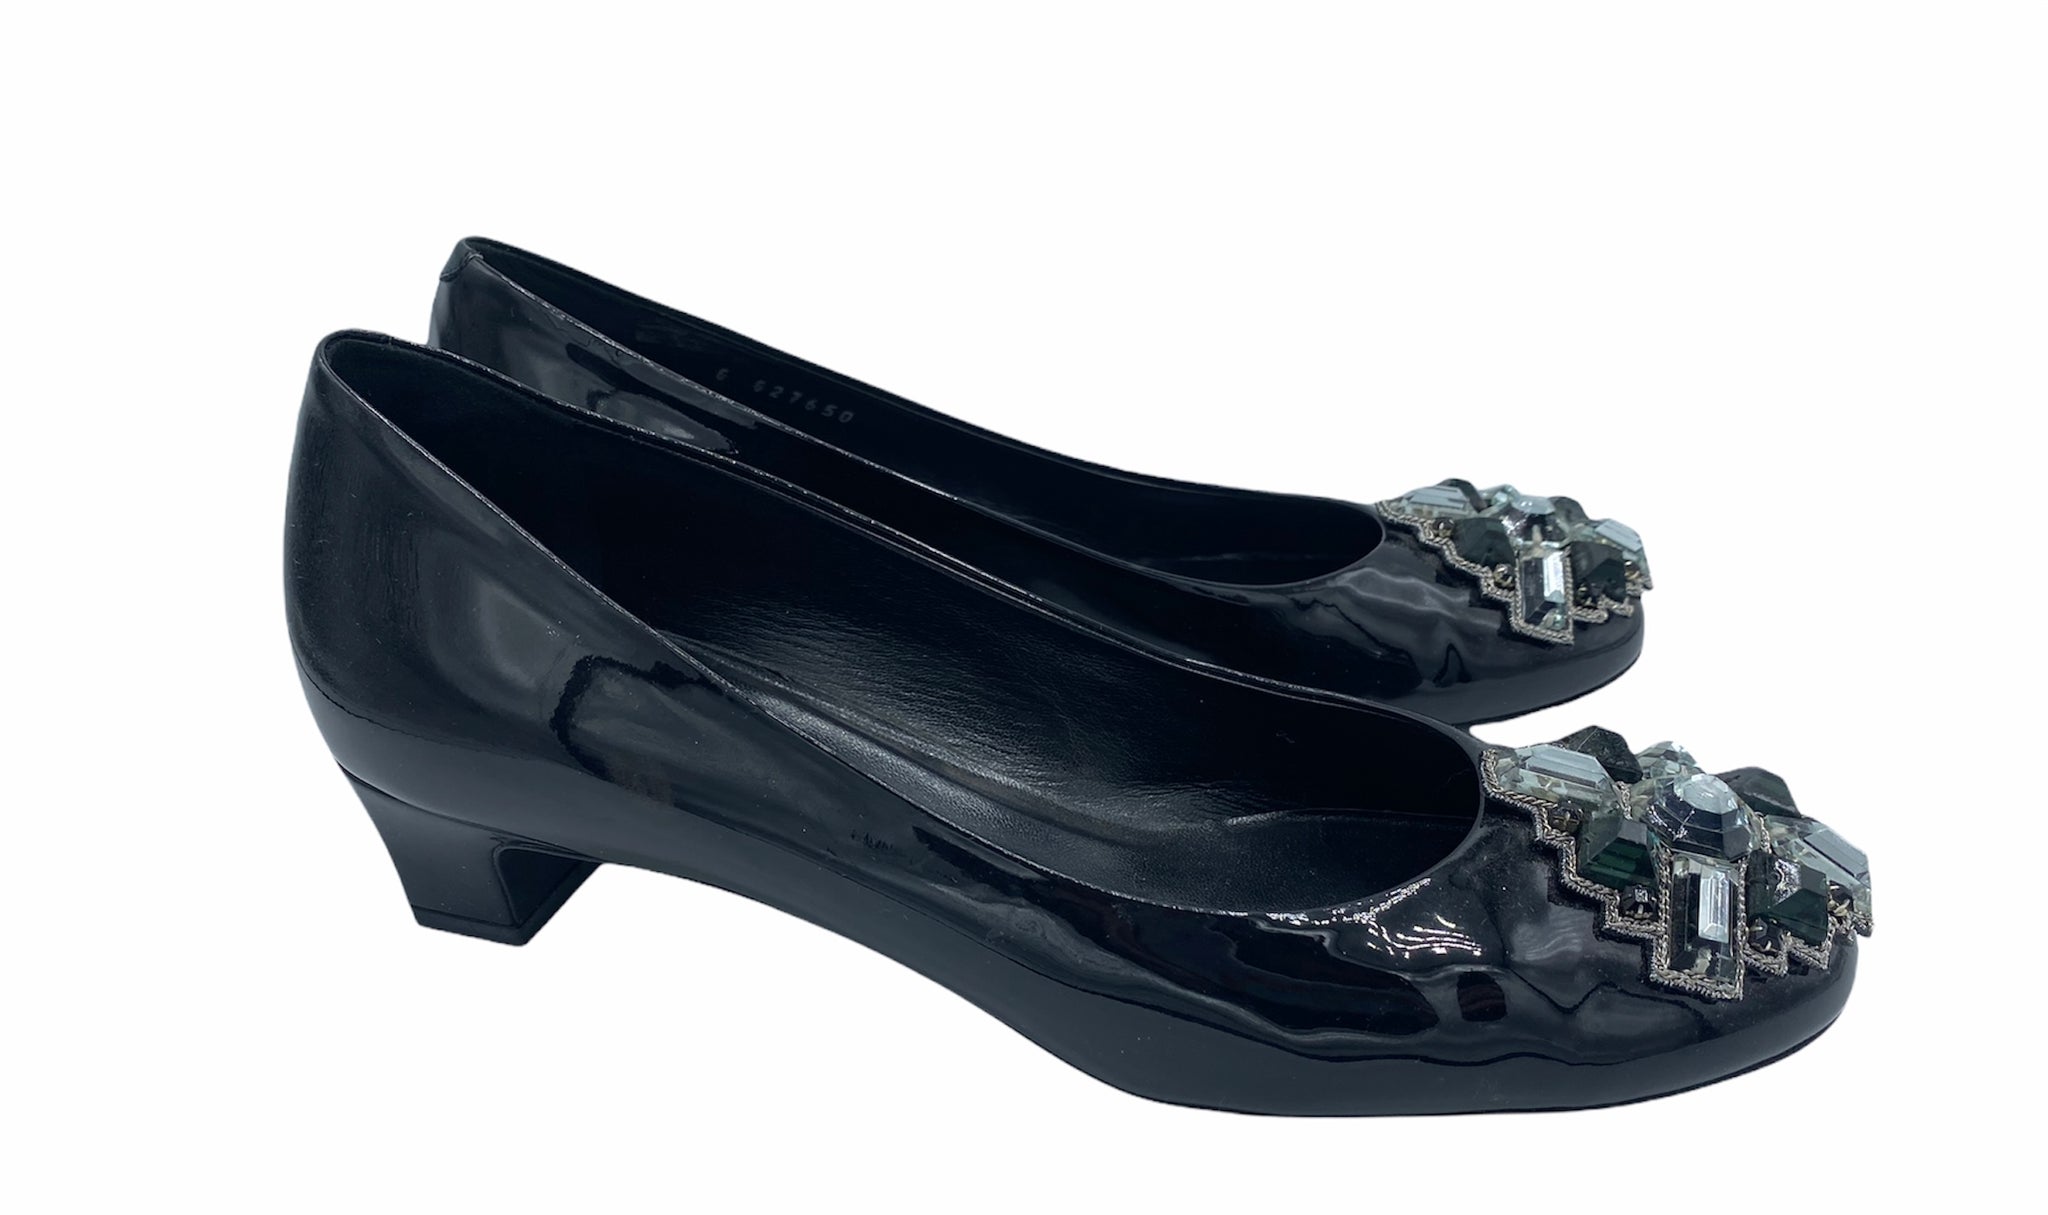 Chanel  Contemporary Black Patent Slippers with Jeweled Embellishment SIDE 2 0f 4